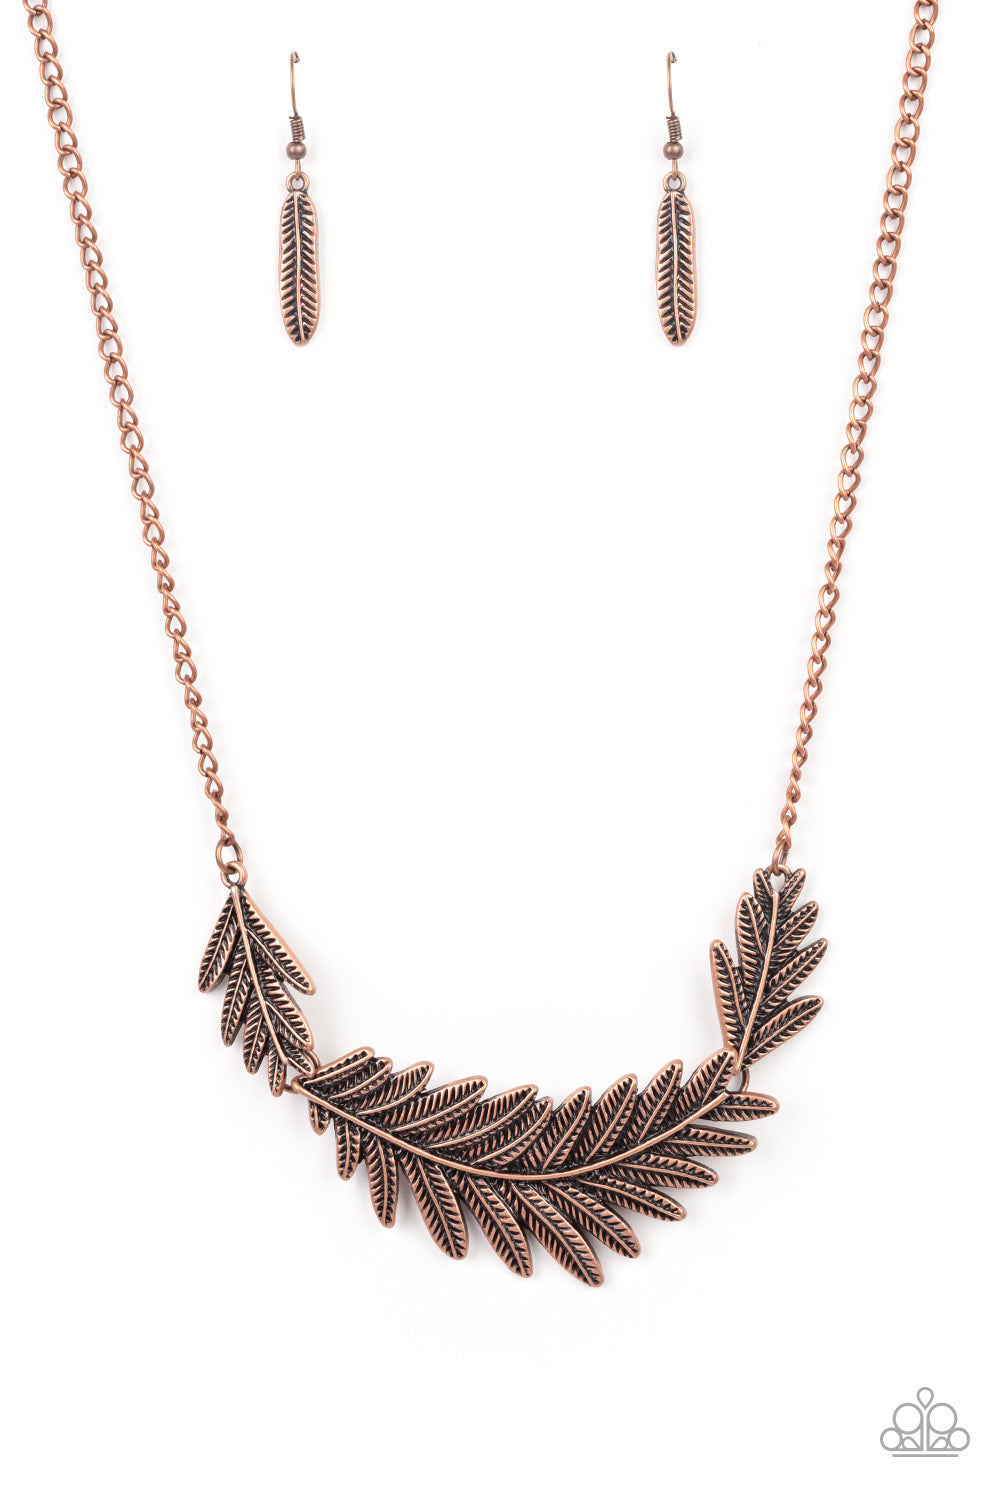 Queen of the QUILL Copper Necklace - Paparazzi Accessories  Etched and embossed in lifelike textures, leafy copper plates connect into a dramatic feather below the collar for a seasonal statement. Features an adjustable clasp closure.  All Paparazzi Accessories are lead free and nickel free!  Sold as one individual necklace. Includes one pair of matching earrings.